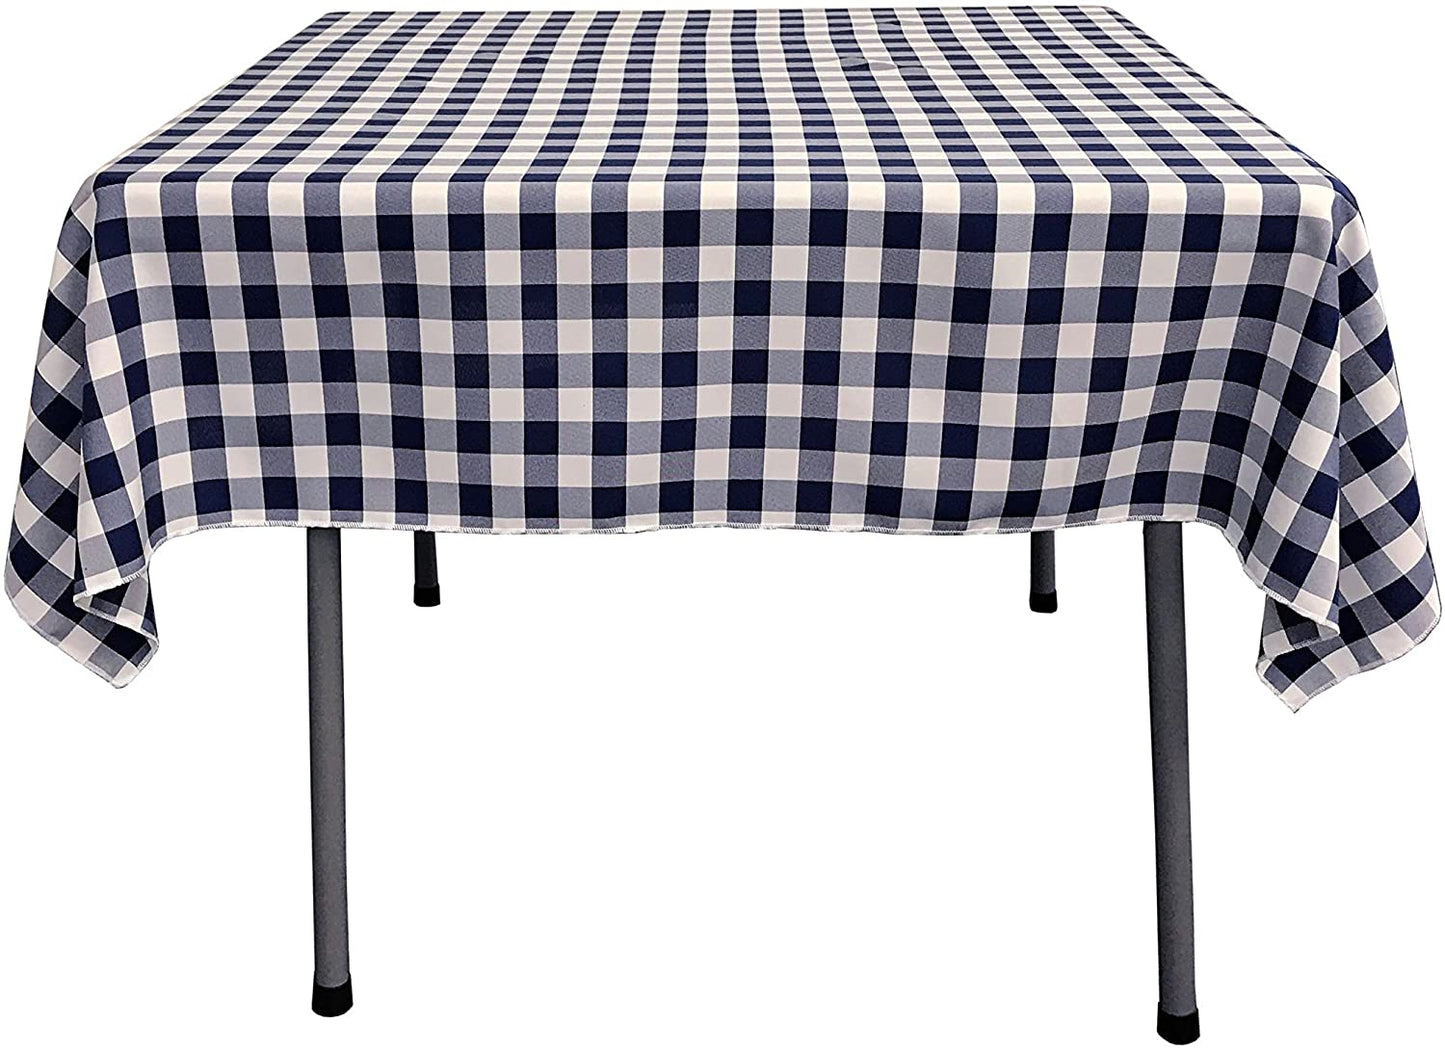 Gingham Checkered Square Tablecloth Navy and White